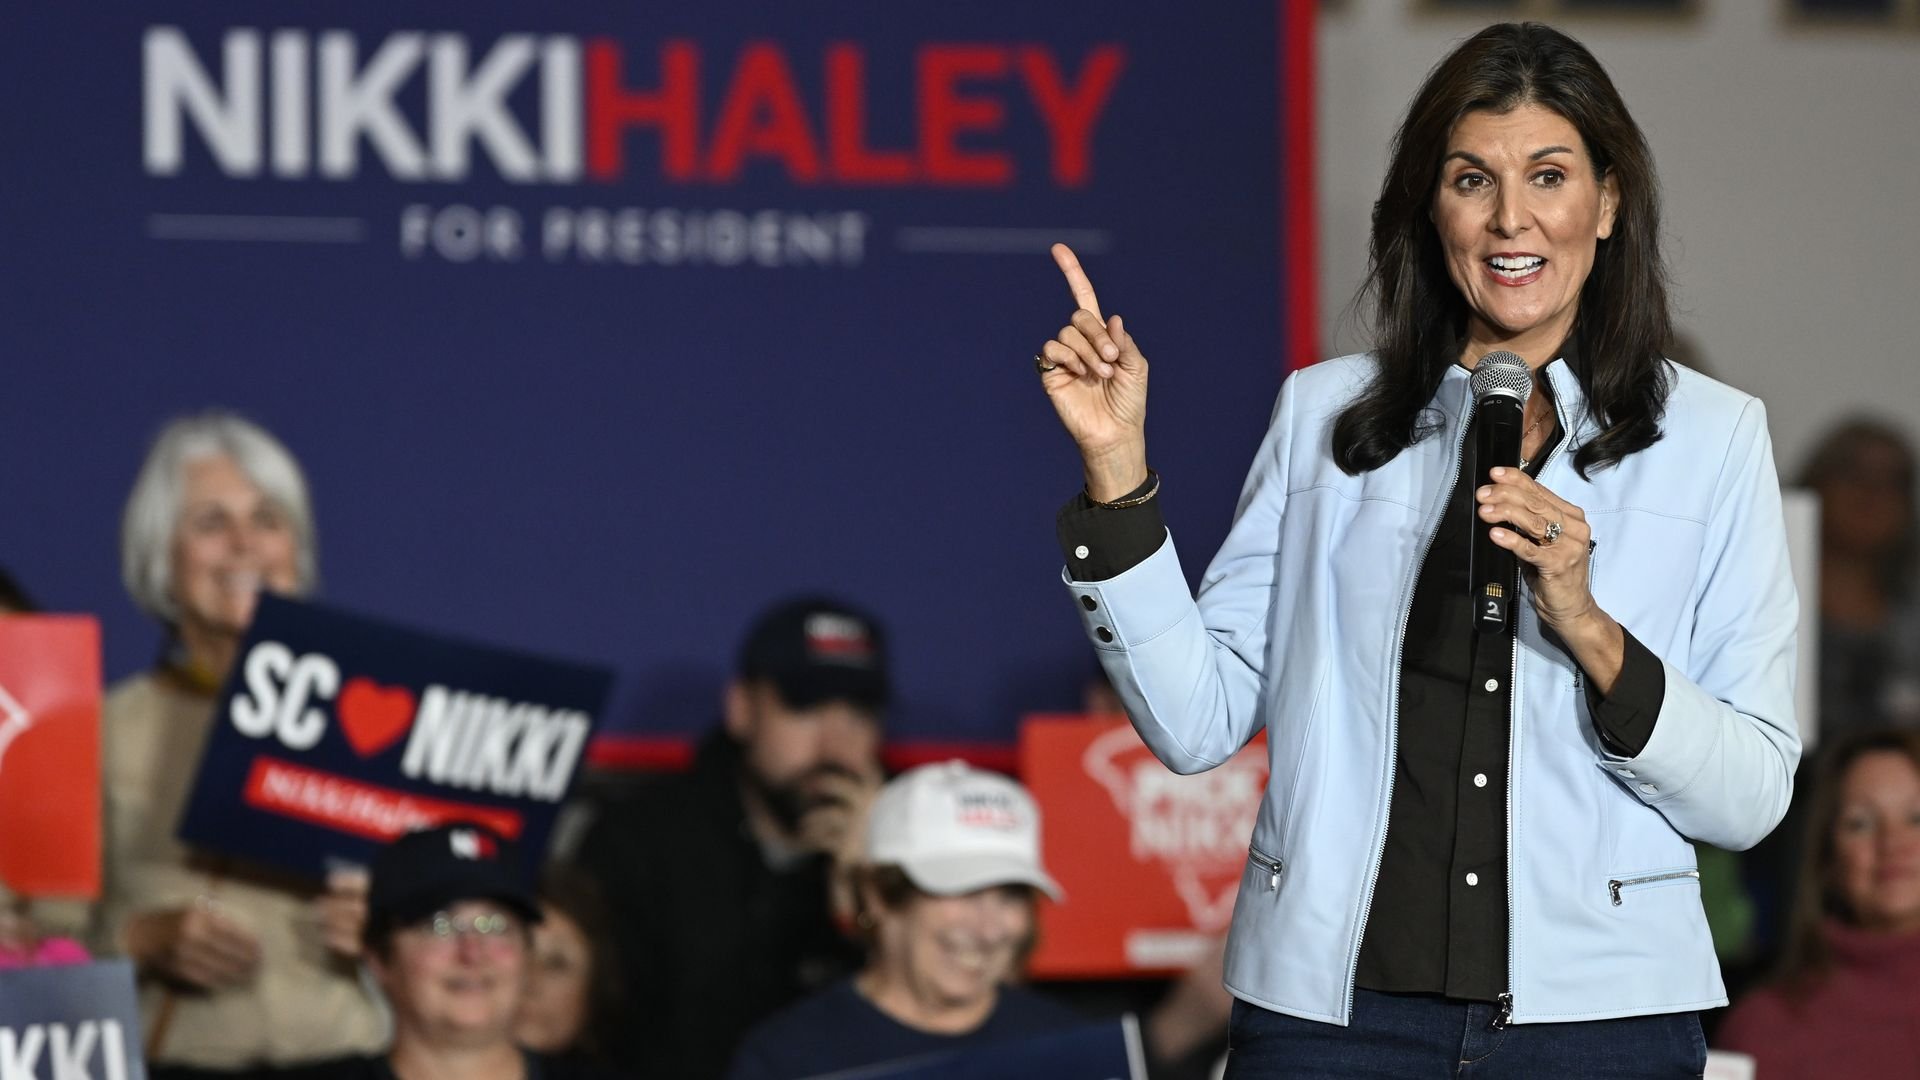 Haley calls for "moral clarity" in first ad of GOP primary season